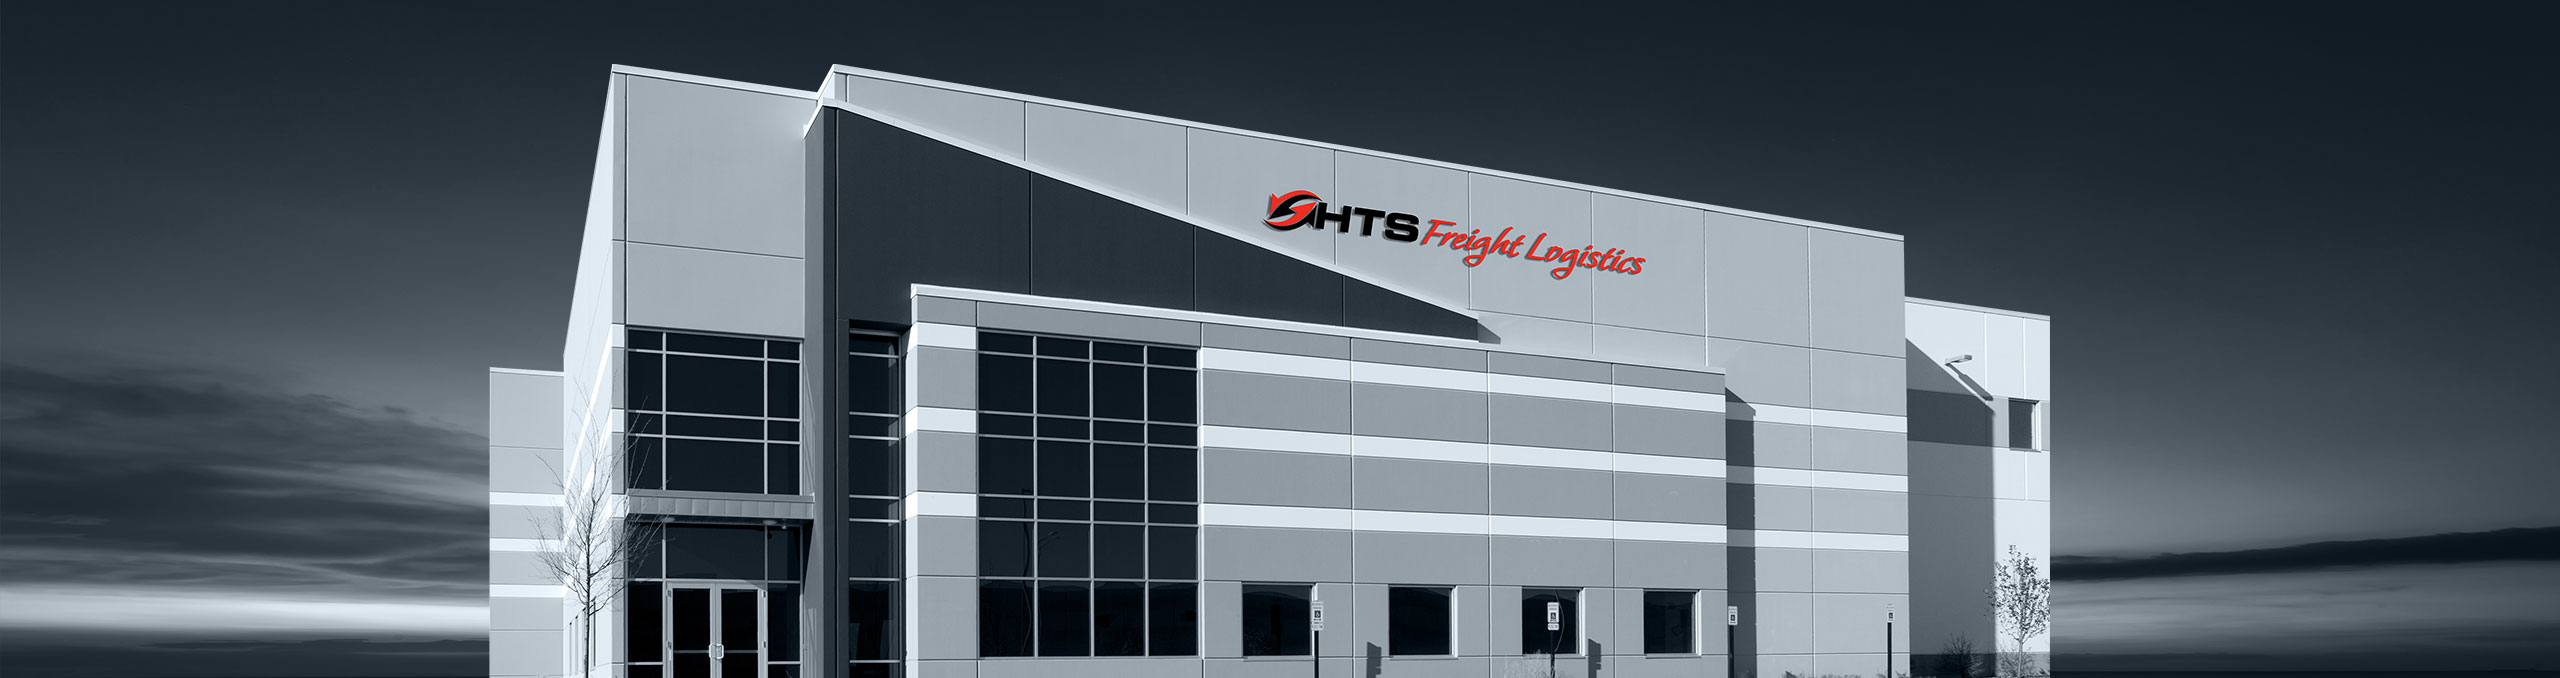 HTS Freight Logistics office building